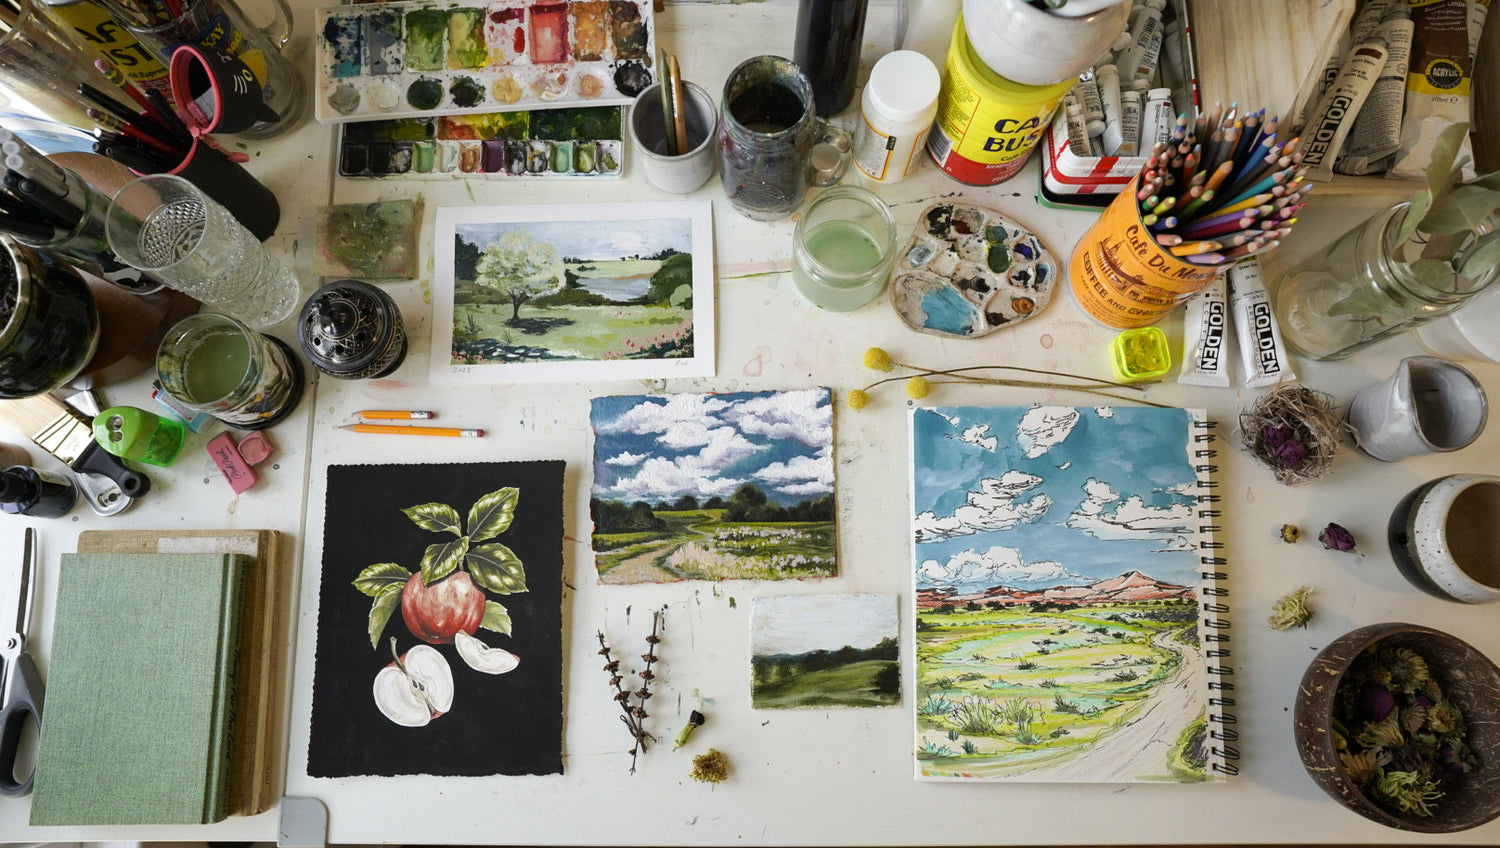 Nature inspired artwork including botanical illustrations and landscape paintings displayed in a flat lay on a studio work table with art supplies